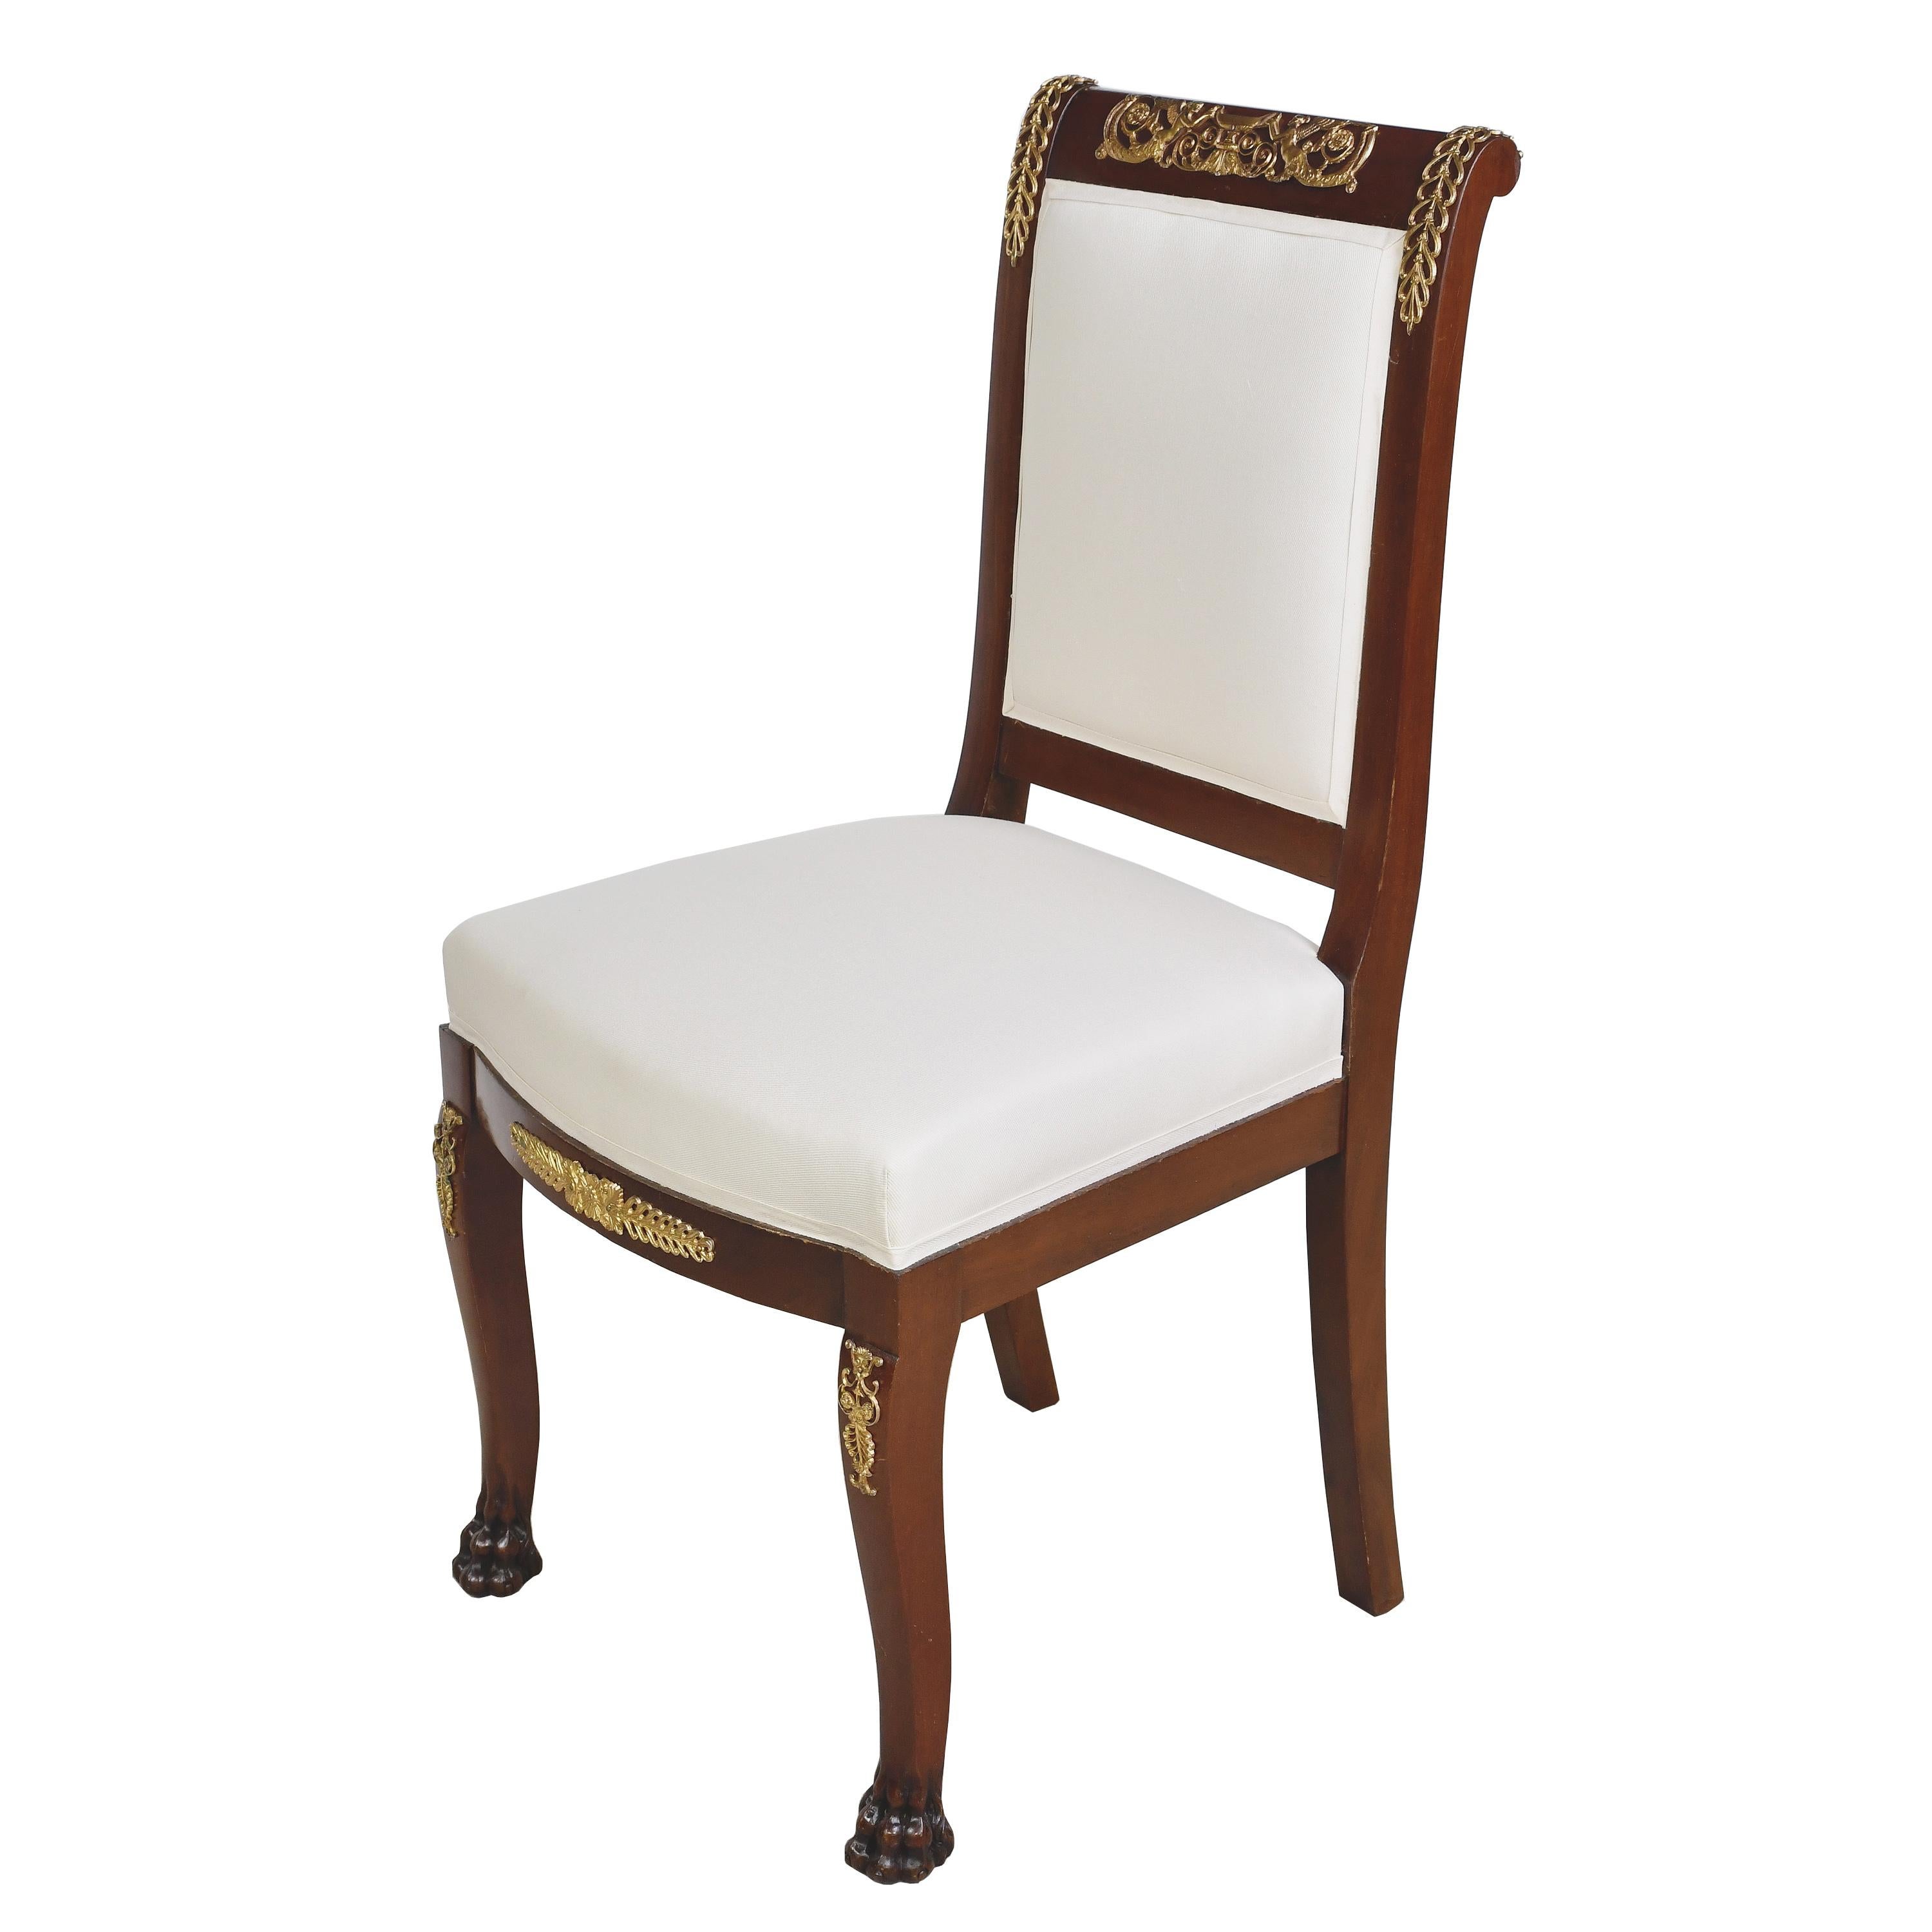 A handsome pair (2) of French Empire-style dining or salon chairs in an auburn brown-colored mahogany with upholstered square back & upholstered serpentine seat. Bronze doré ormolu mounts embellish the frame, with winged female figures holding an